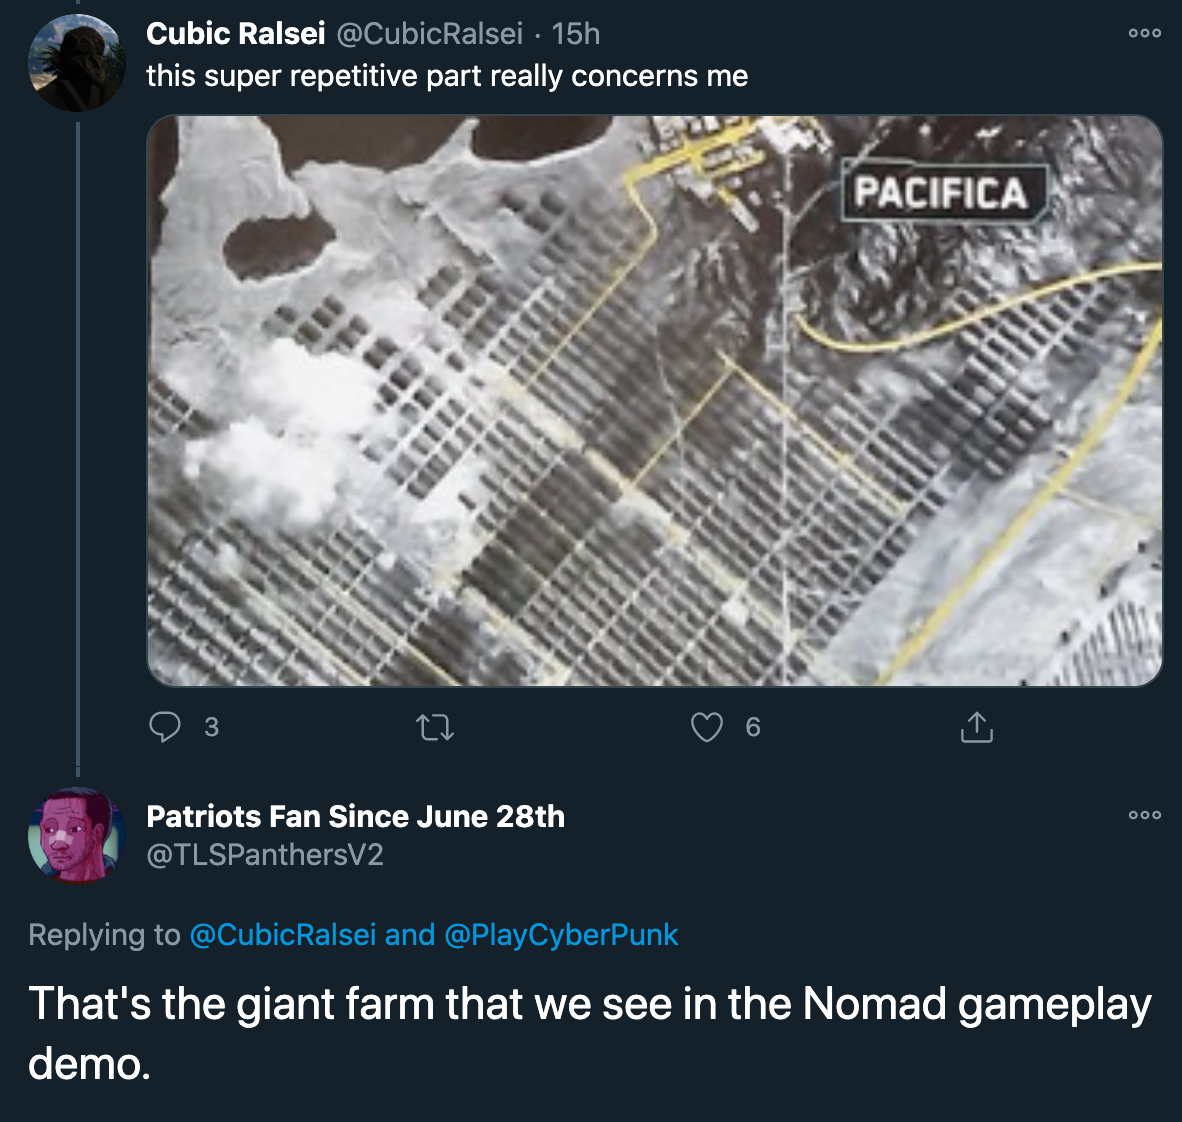 this super repetitive part really concerns me - That's the giant farm that we see in the Nomad gameplay demo.